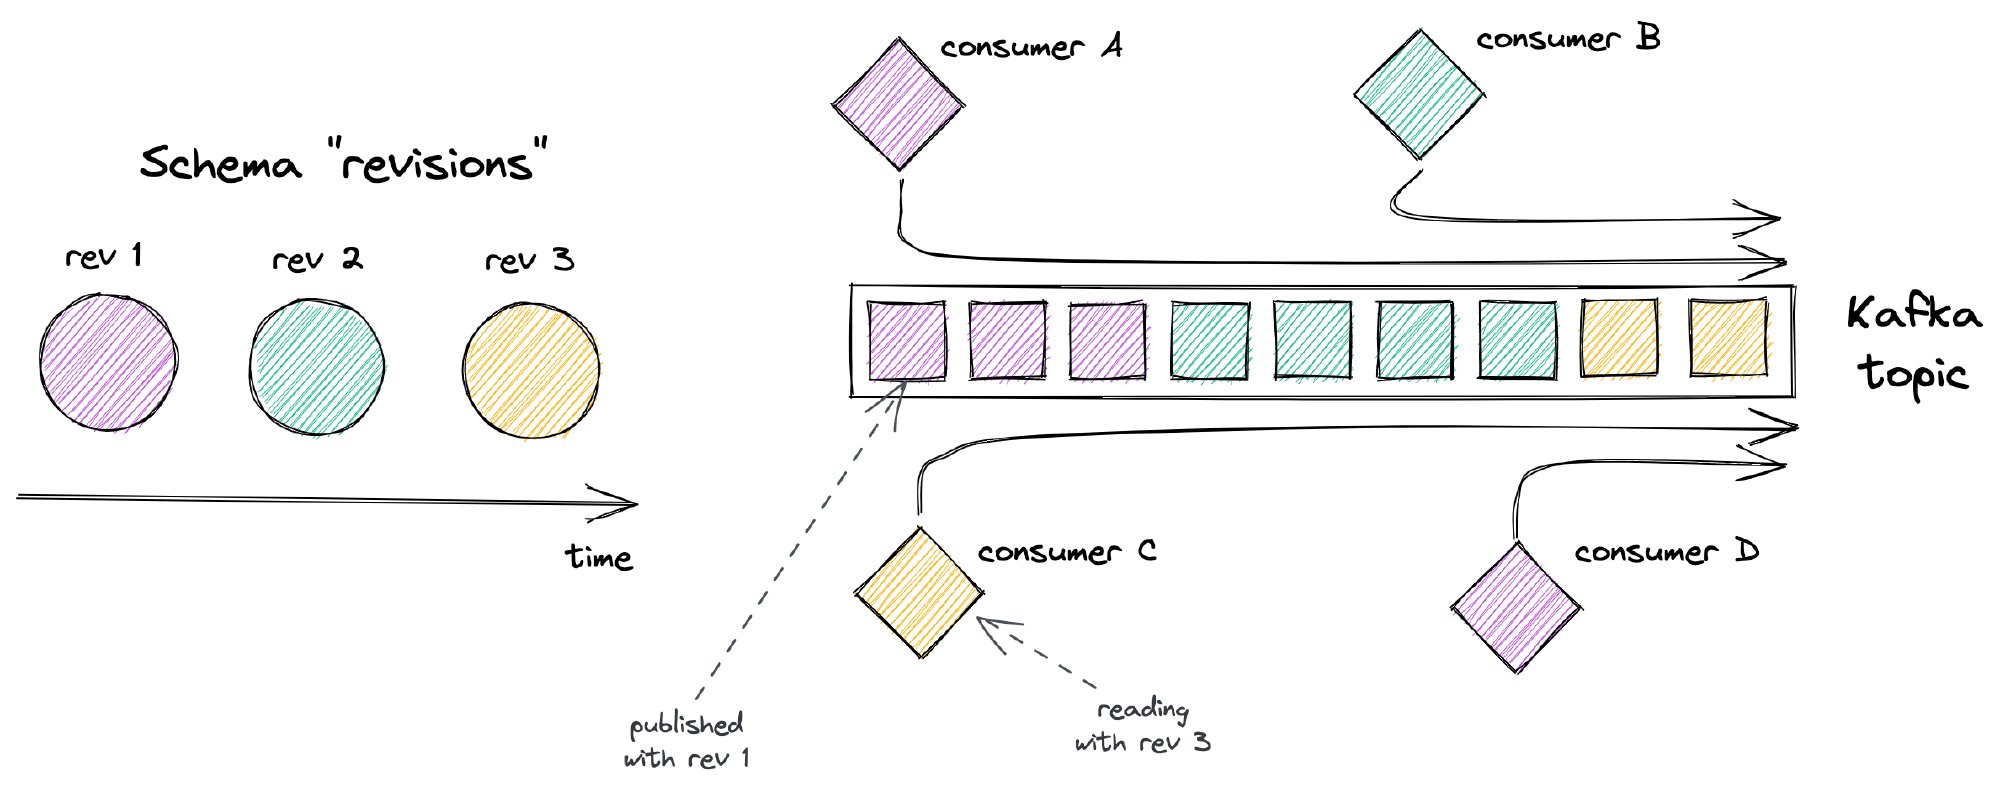 A diagram presenting consuming events published with different schema revisions